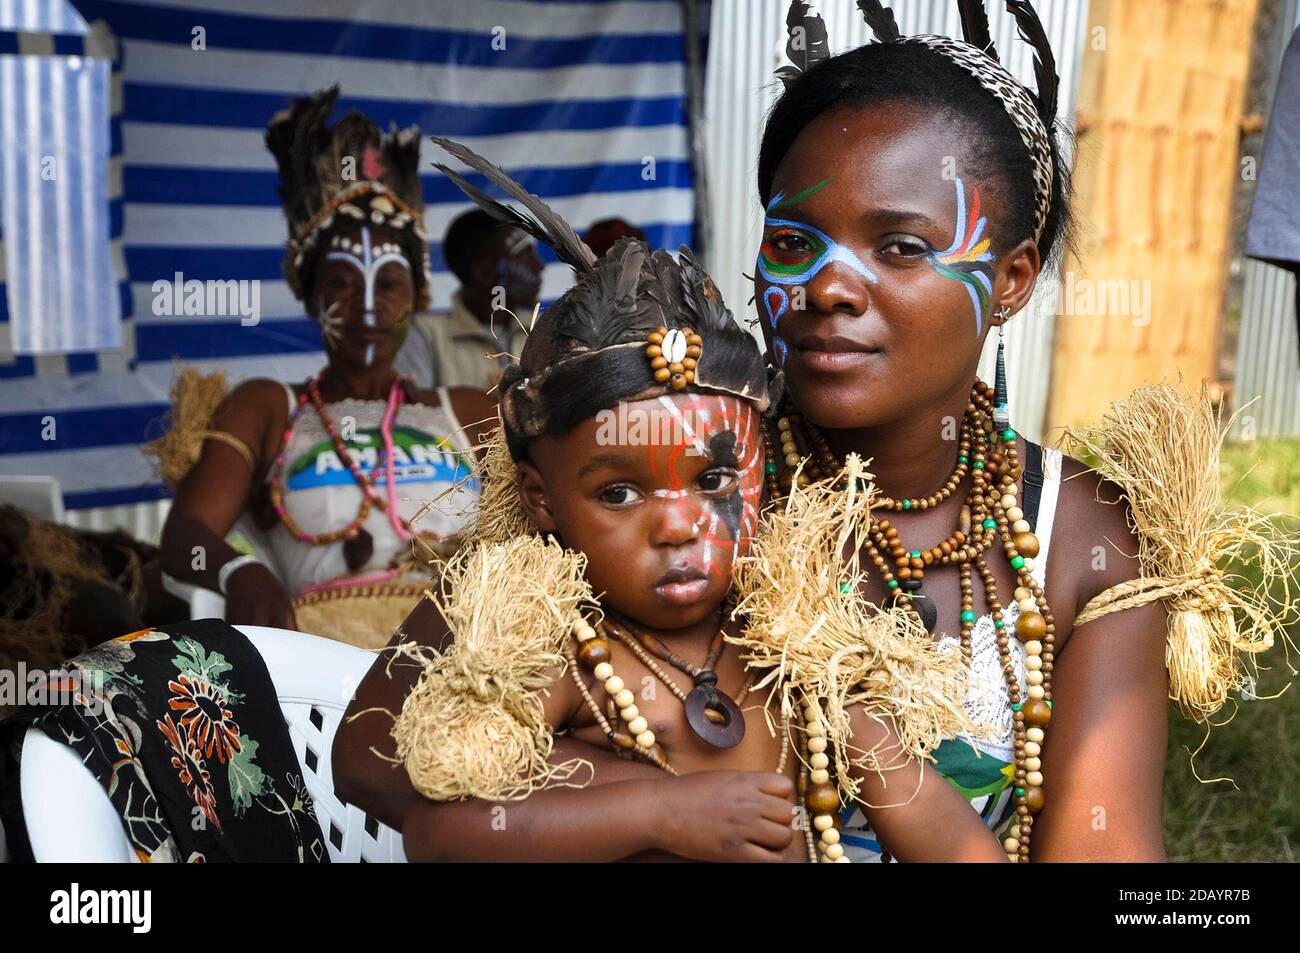 A woman and child, both members of the Matakiyo Group, wear traditional clothes and face paint in Democratic Republic of Congo. Stock Photo